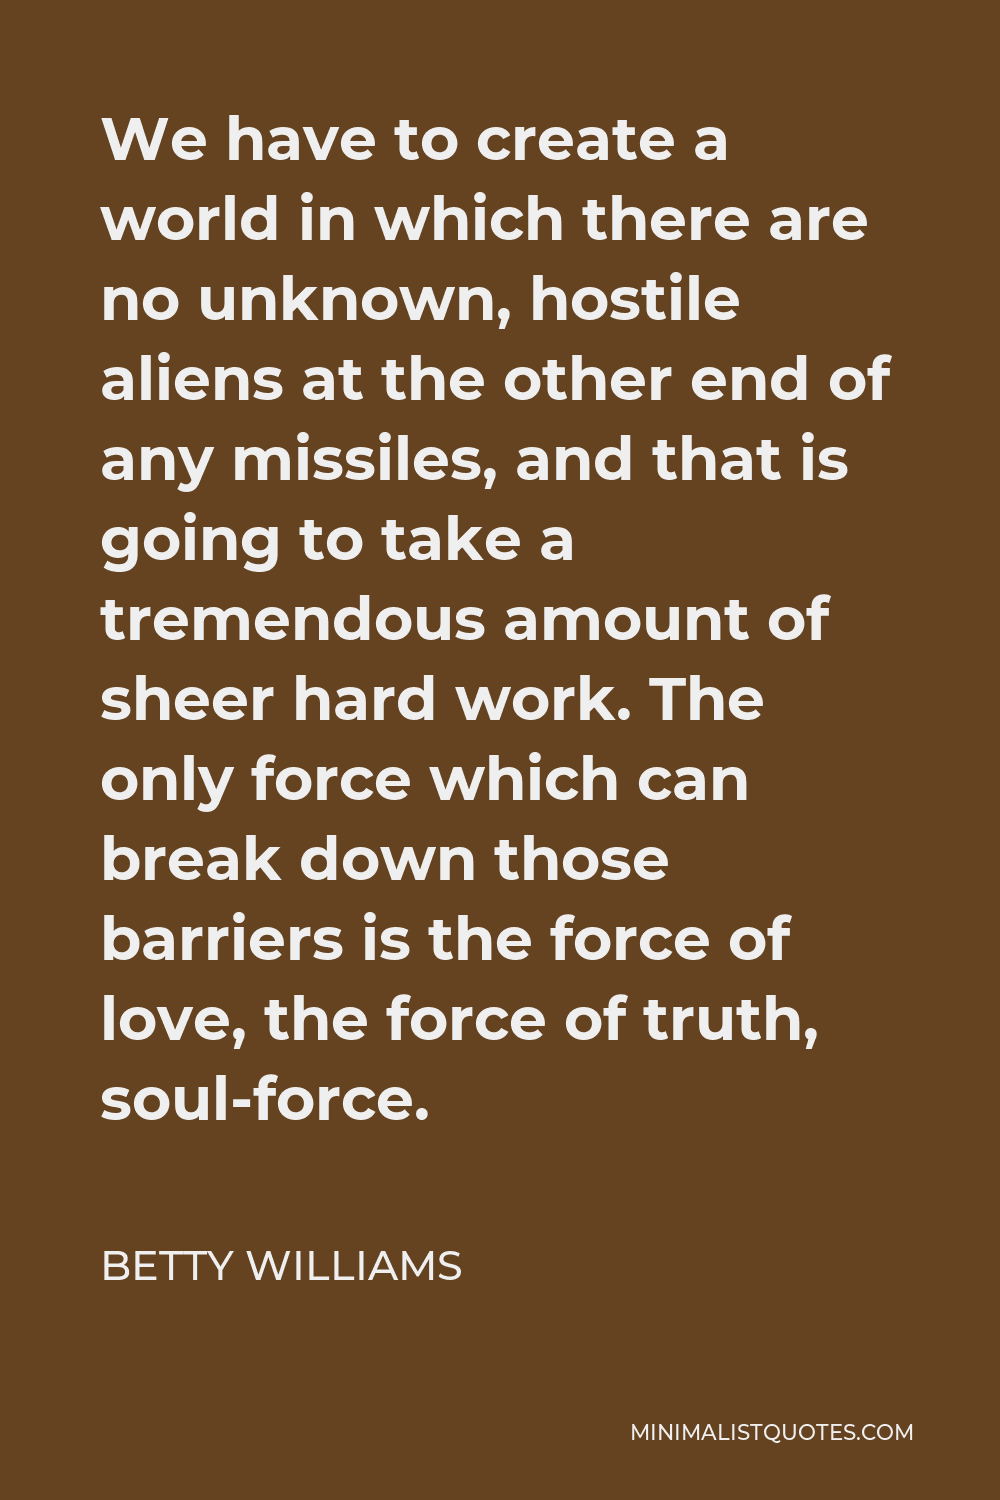 Betty Williams Quote - We have to create a world in which there are no unknown, hostile aliens at the other end of any missiles, and that is going to take a tremendous amount of sheer hard work. The only force which can break down those barriers is the force of love, the force of truth, soul-force.